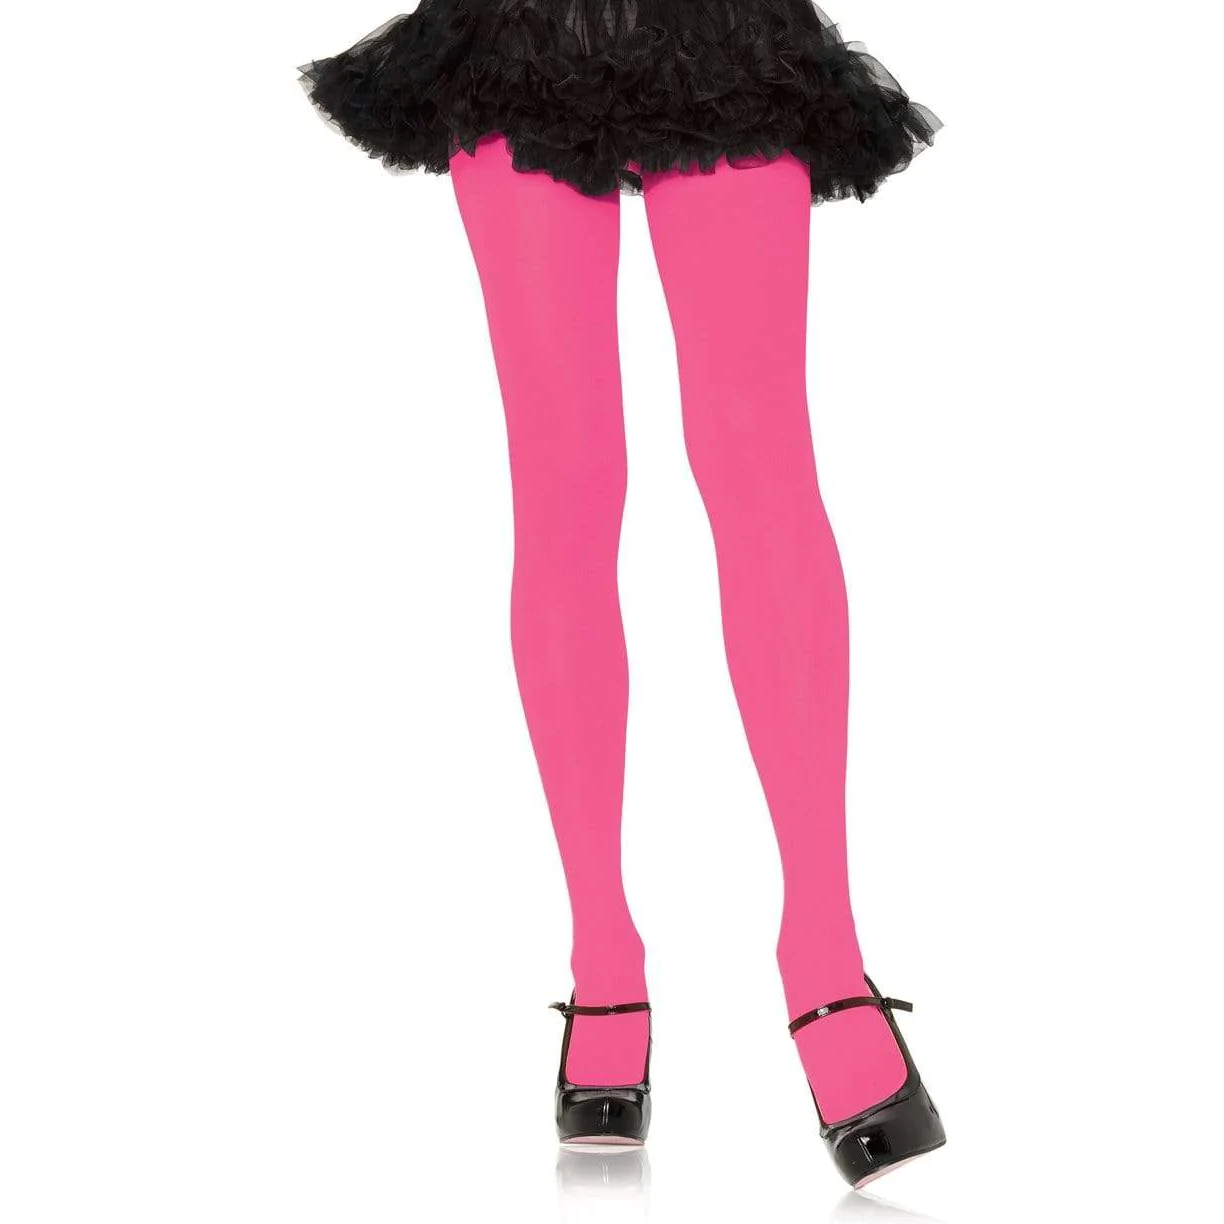 SOLID COLOR NYLON TIGHTS BRIGHT PINK